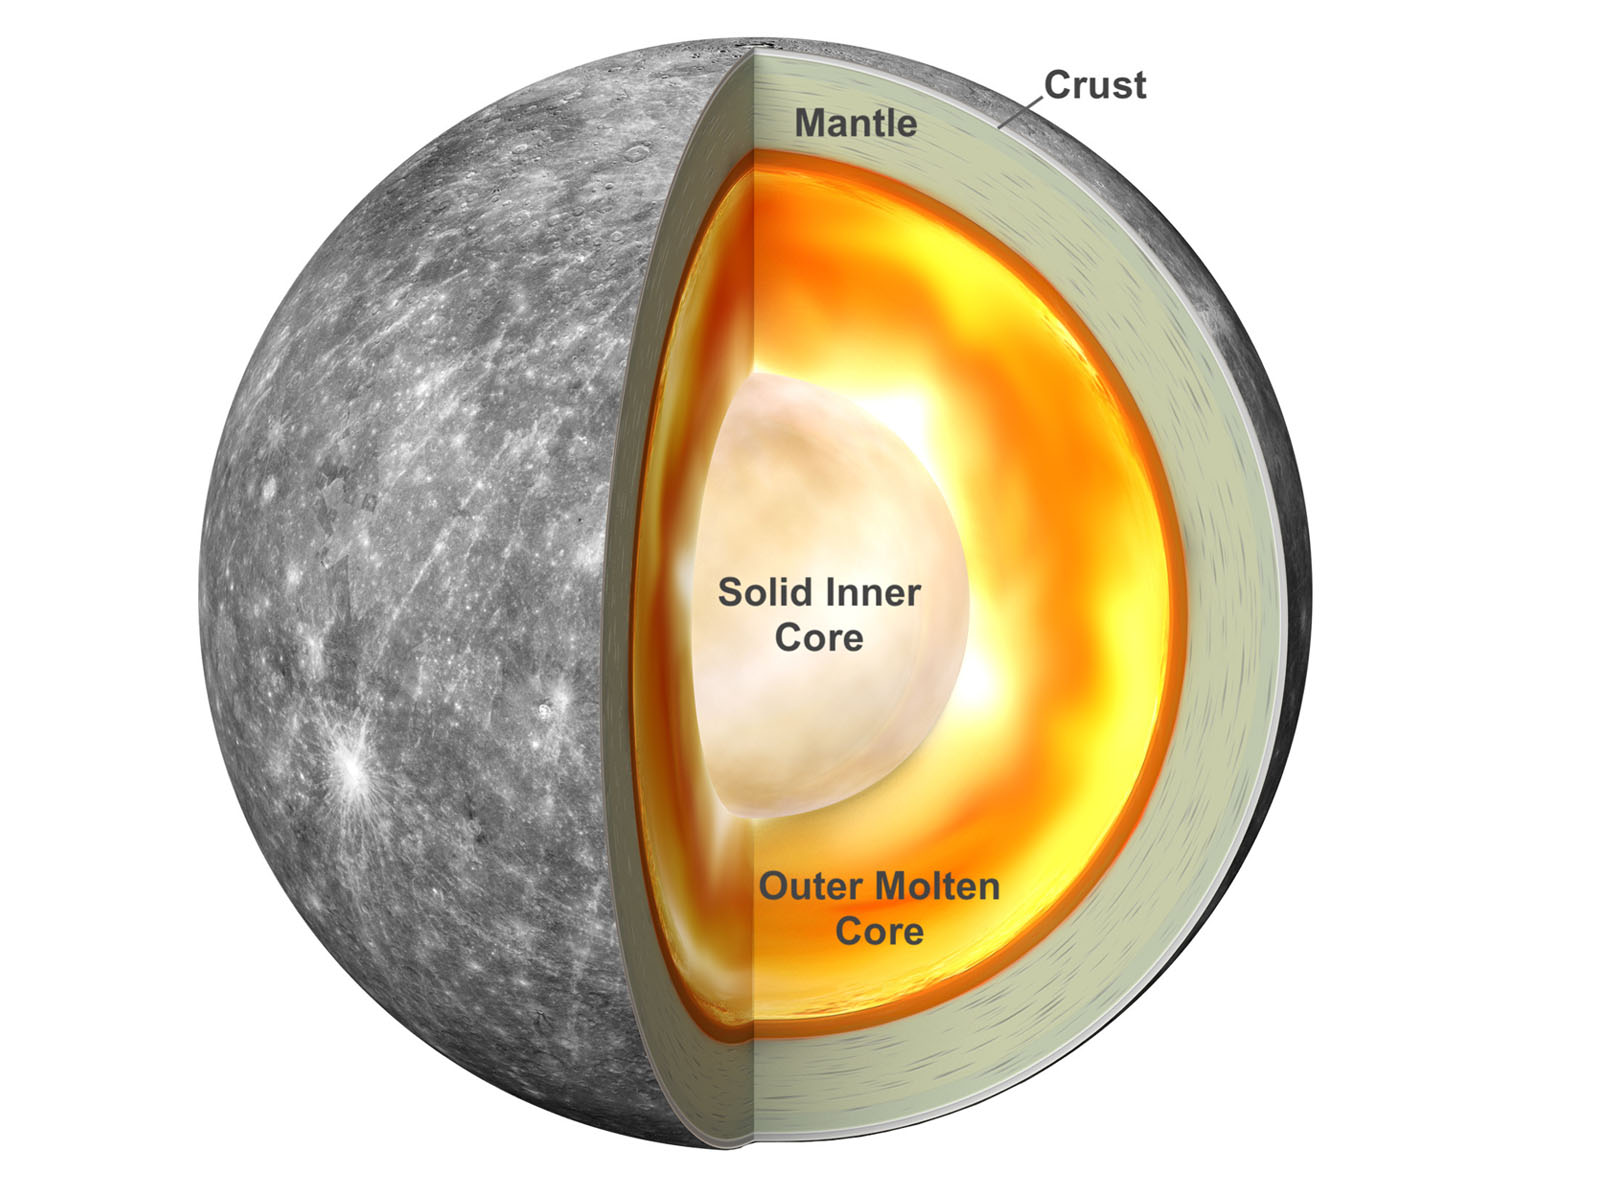 New research shows the sun’s magnetic field drew iron toward the center of our solar system as the planets formed. That explains why Mercury, which is closest to the sun has a bigger, denser, iron core relative to its outer layers than the other rocky planets like Earth and Mars. (Image Credit: NASA's Goddard Space Flight Center.) Click image to download hi-res version.